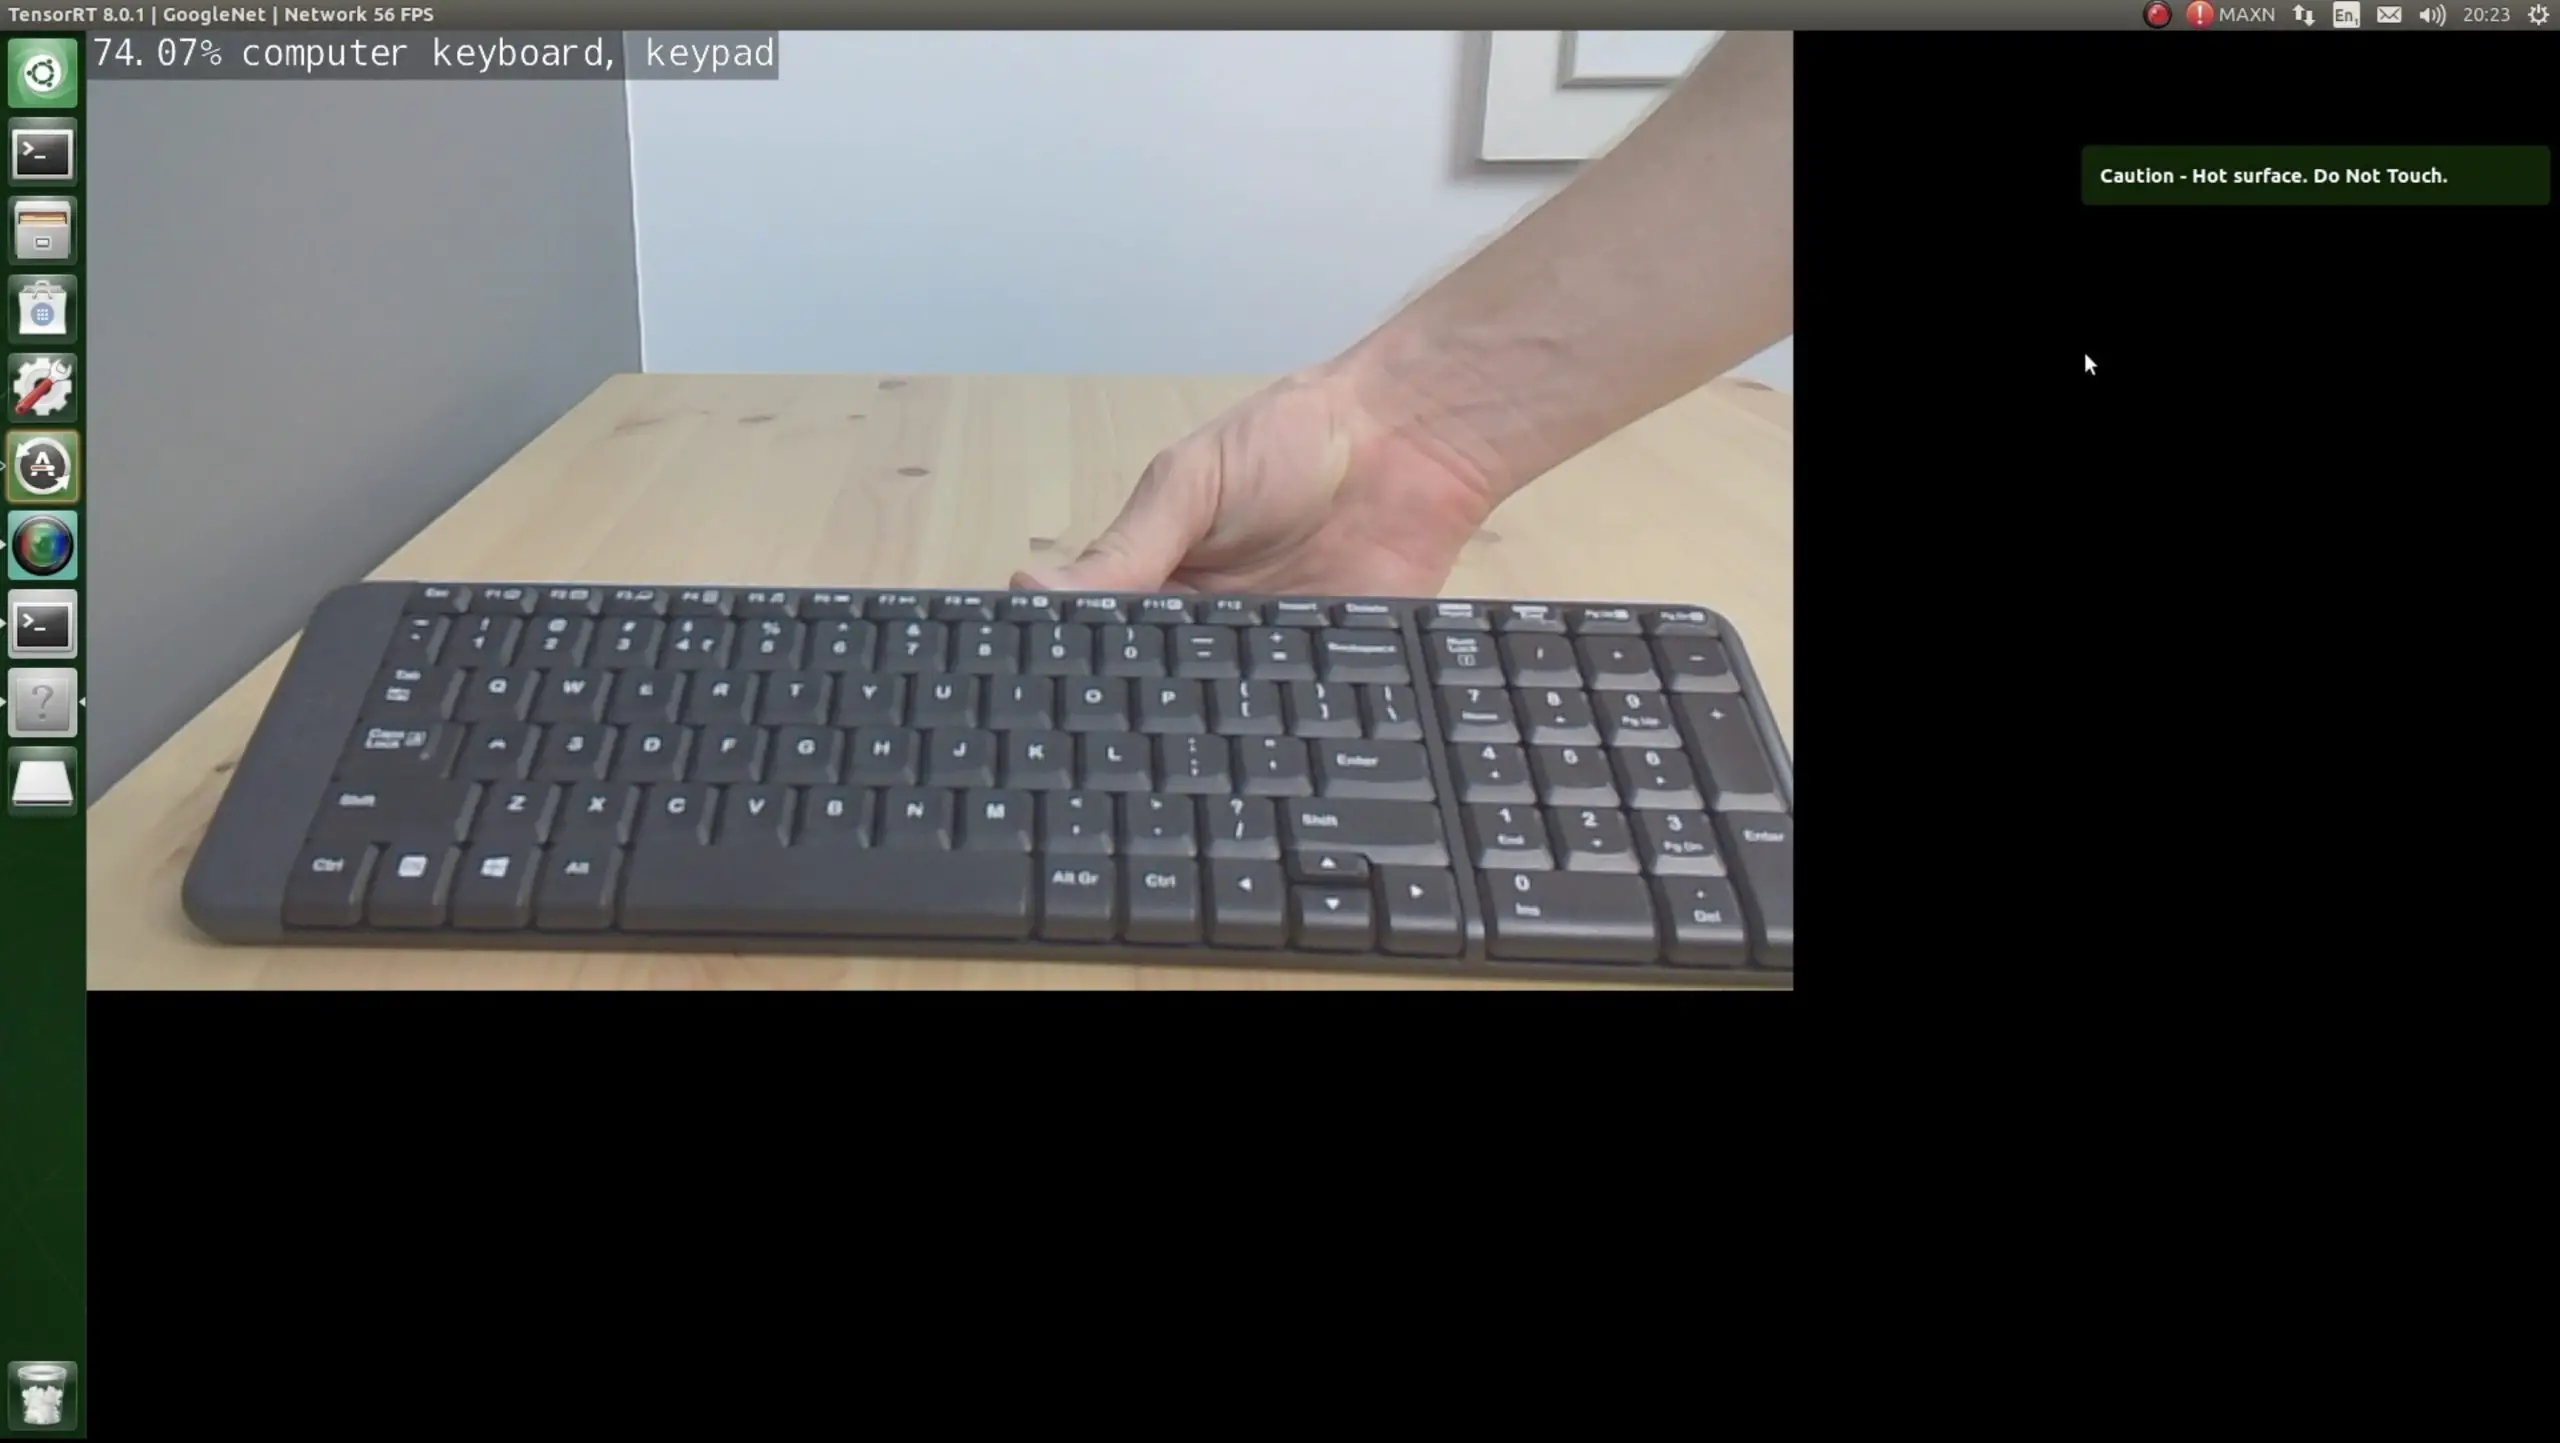 Keyboard Live Object Recognition